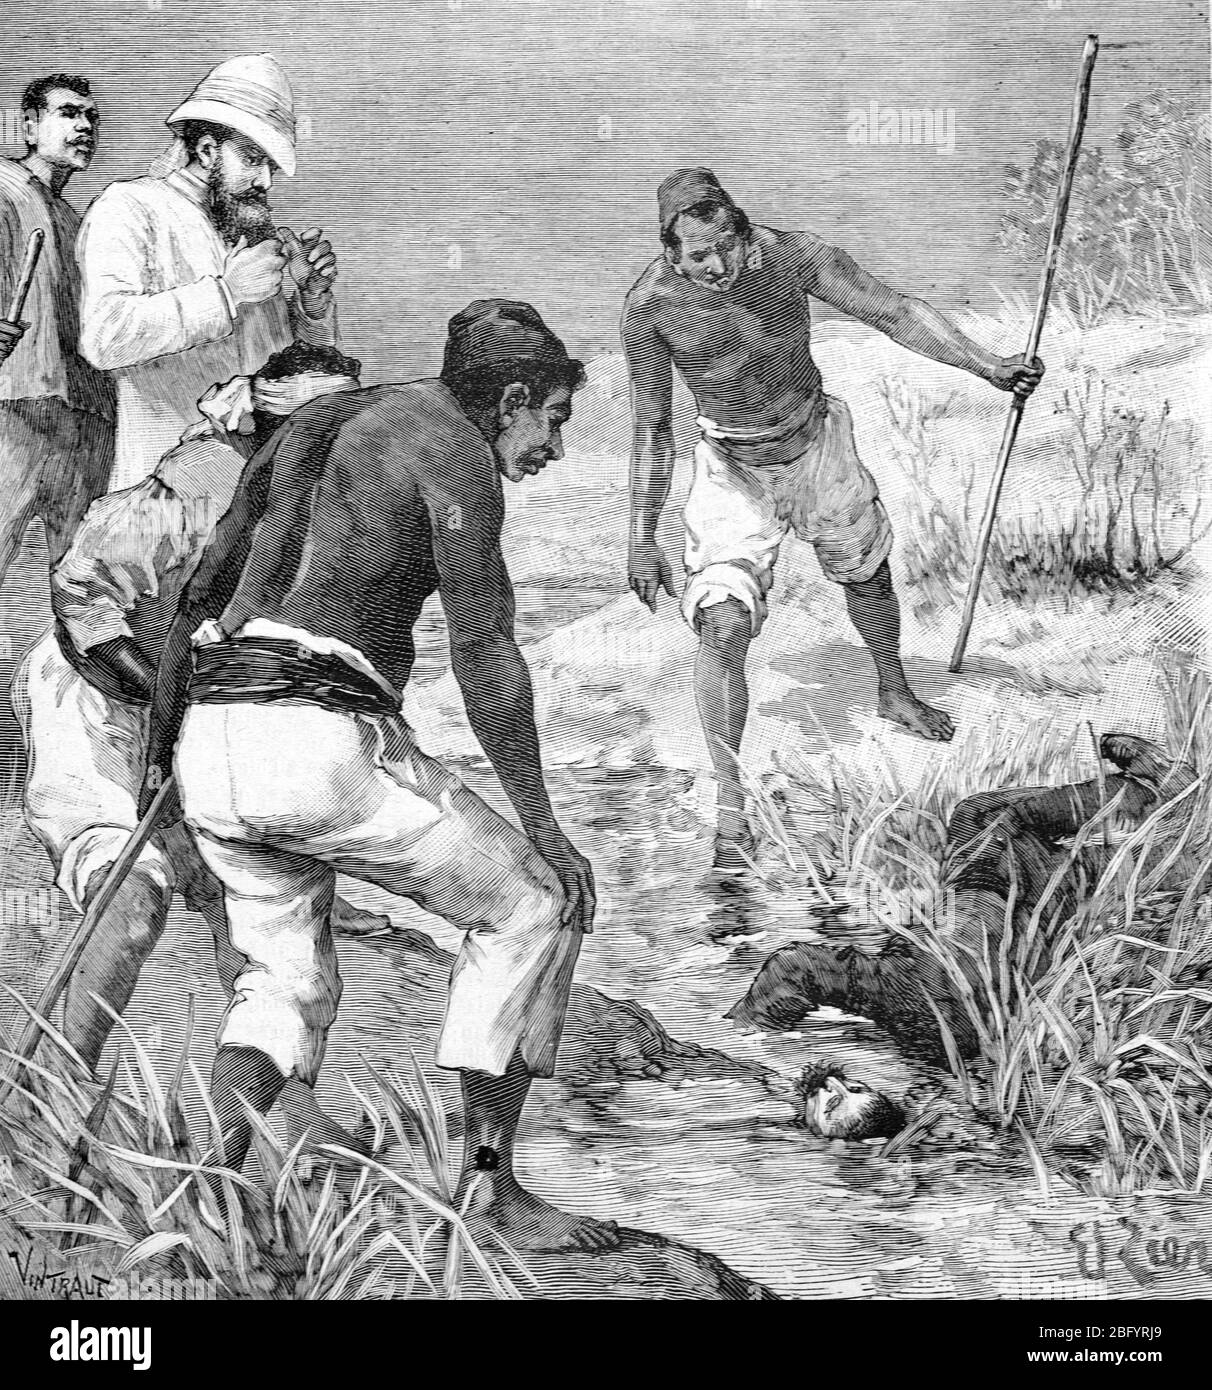 Elisee Trivier (1842-1912) French Explorer of Africa and the First to Cross Africa from the Atlantic to the Indian Ocean, discovers the body of his Fellow Traveller, Emile Weissemburger (1849-1889) Assassinated near Lake Tanganyika. Vintage or Old Illustration or Engraving 1890 Stock Photo